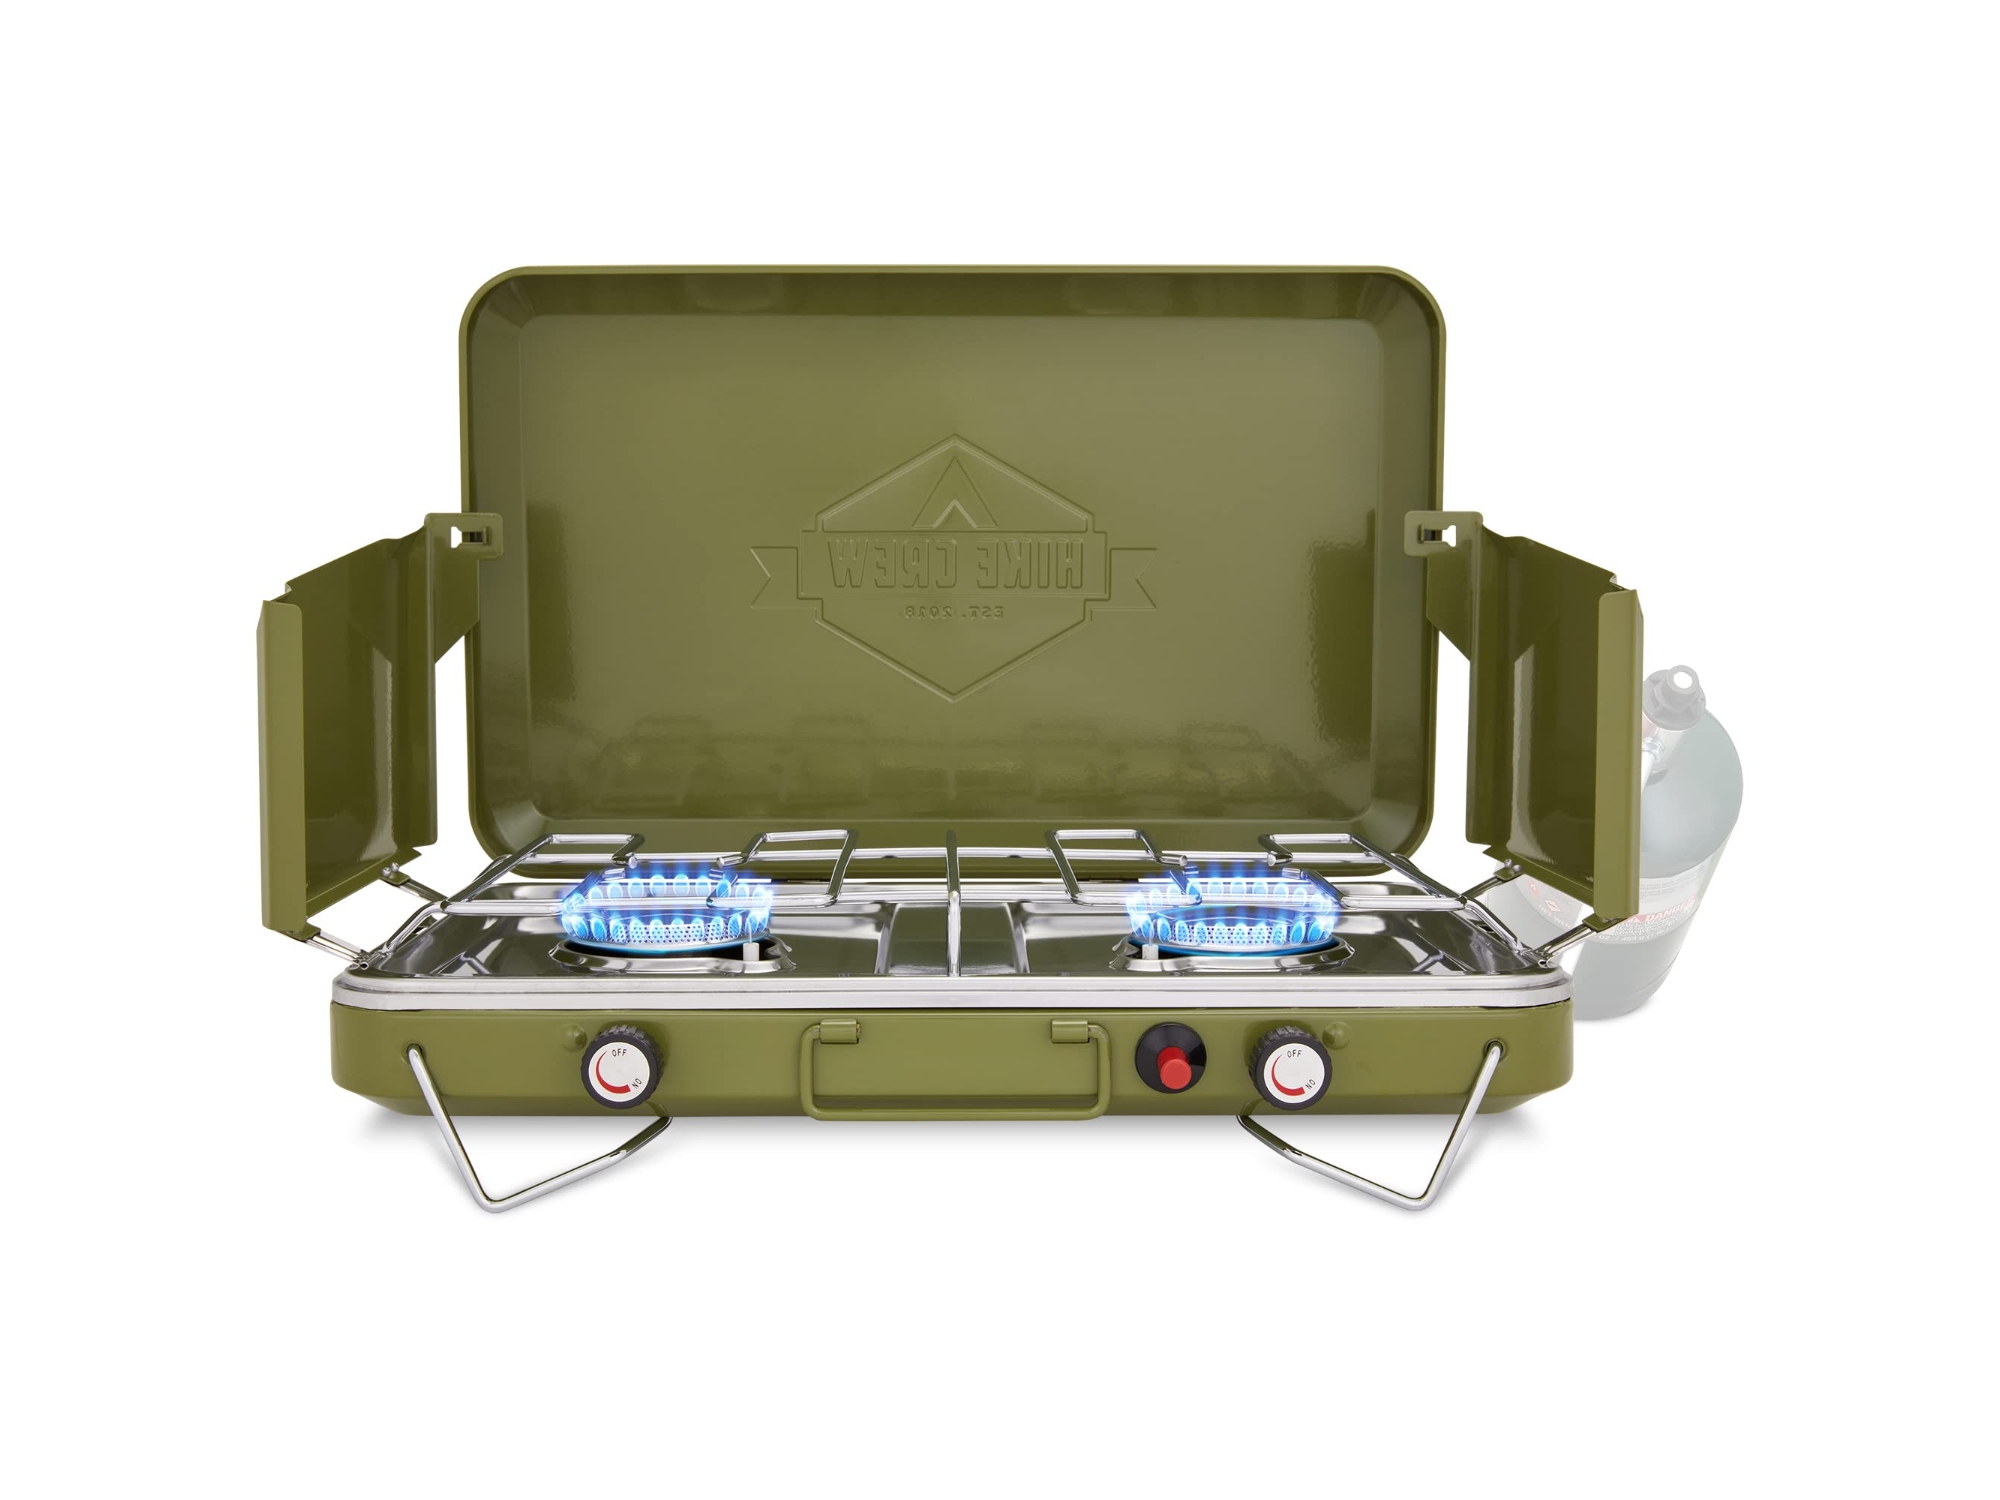 Image of Hike Crew Portable Dual Propane Burner Camping Stove with Igniter Green ID 843812161855